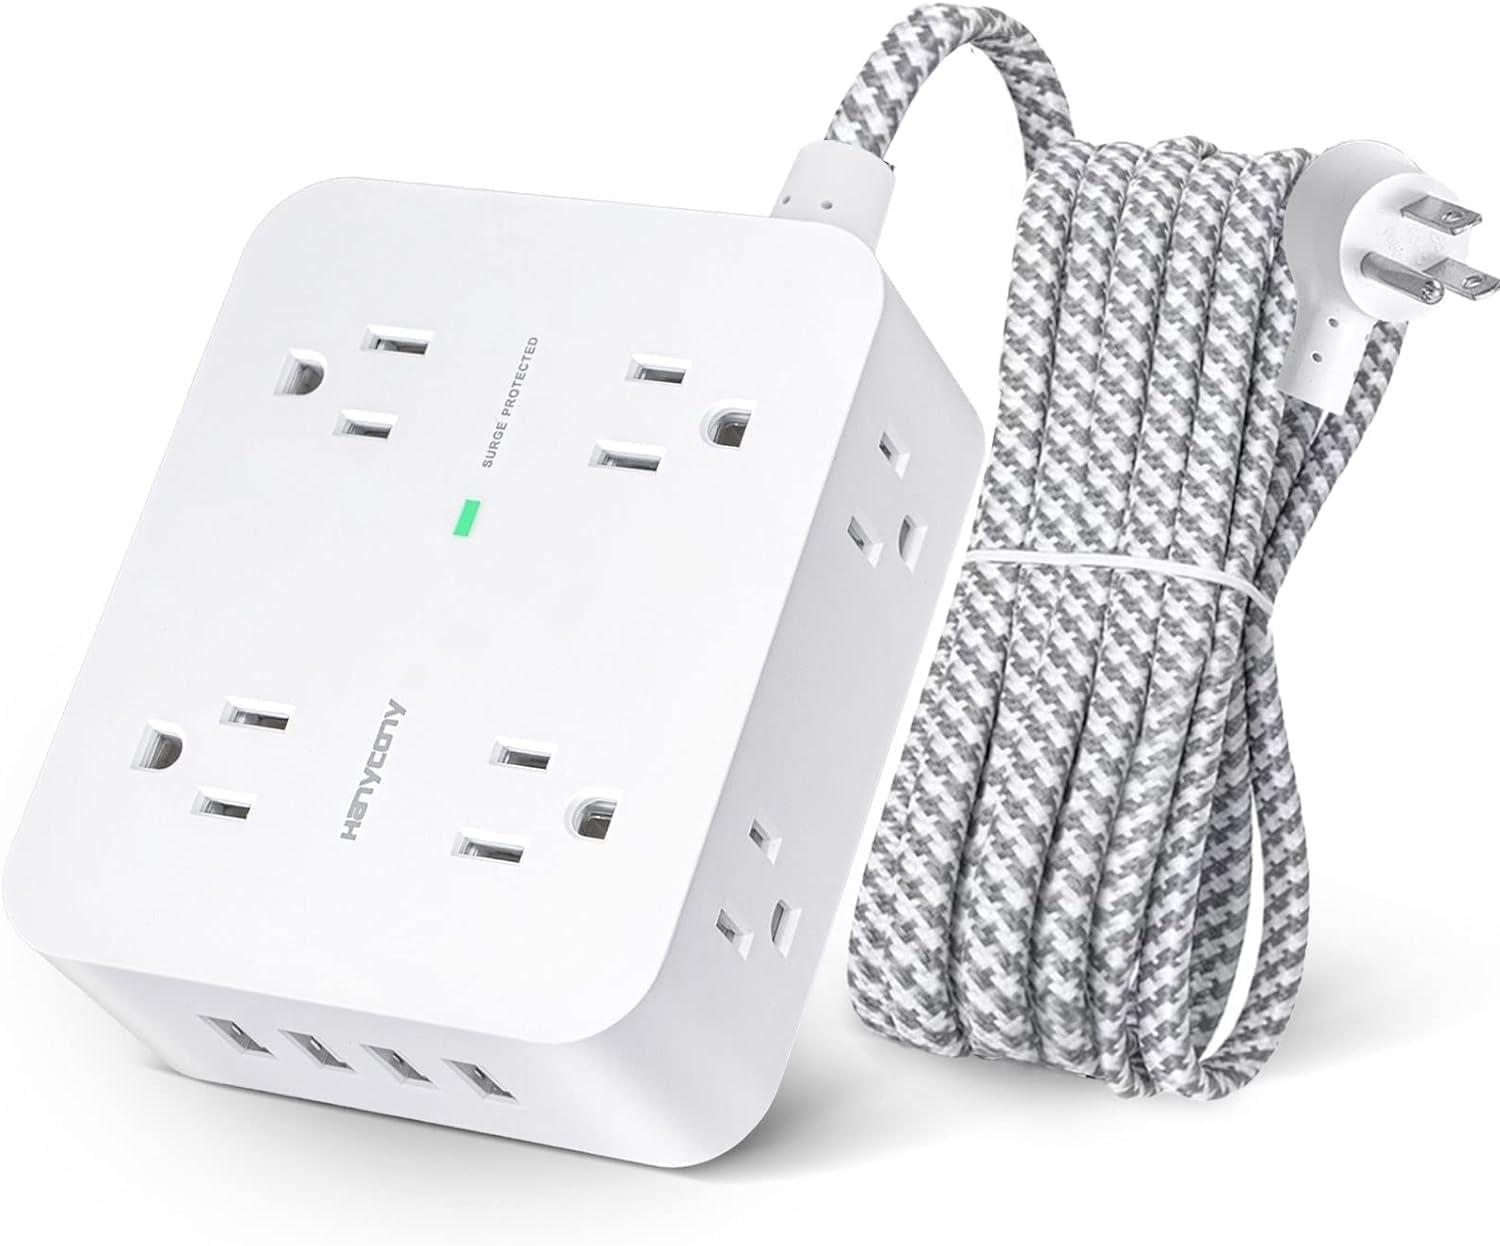 Surge Protector Power Strip by HanyCony for $9.99